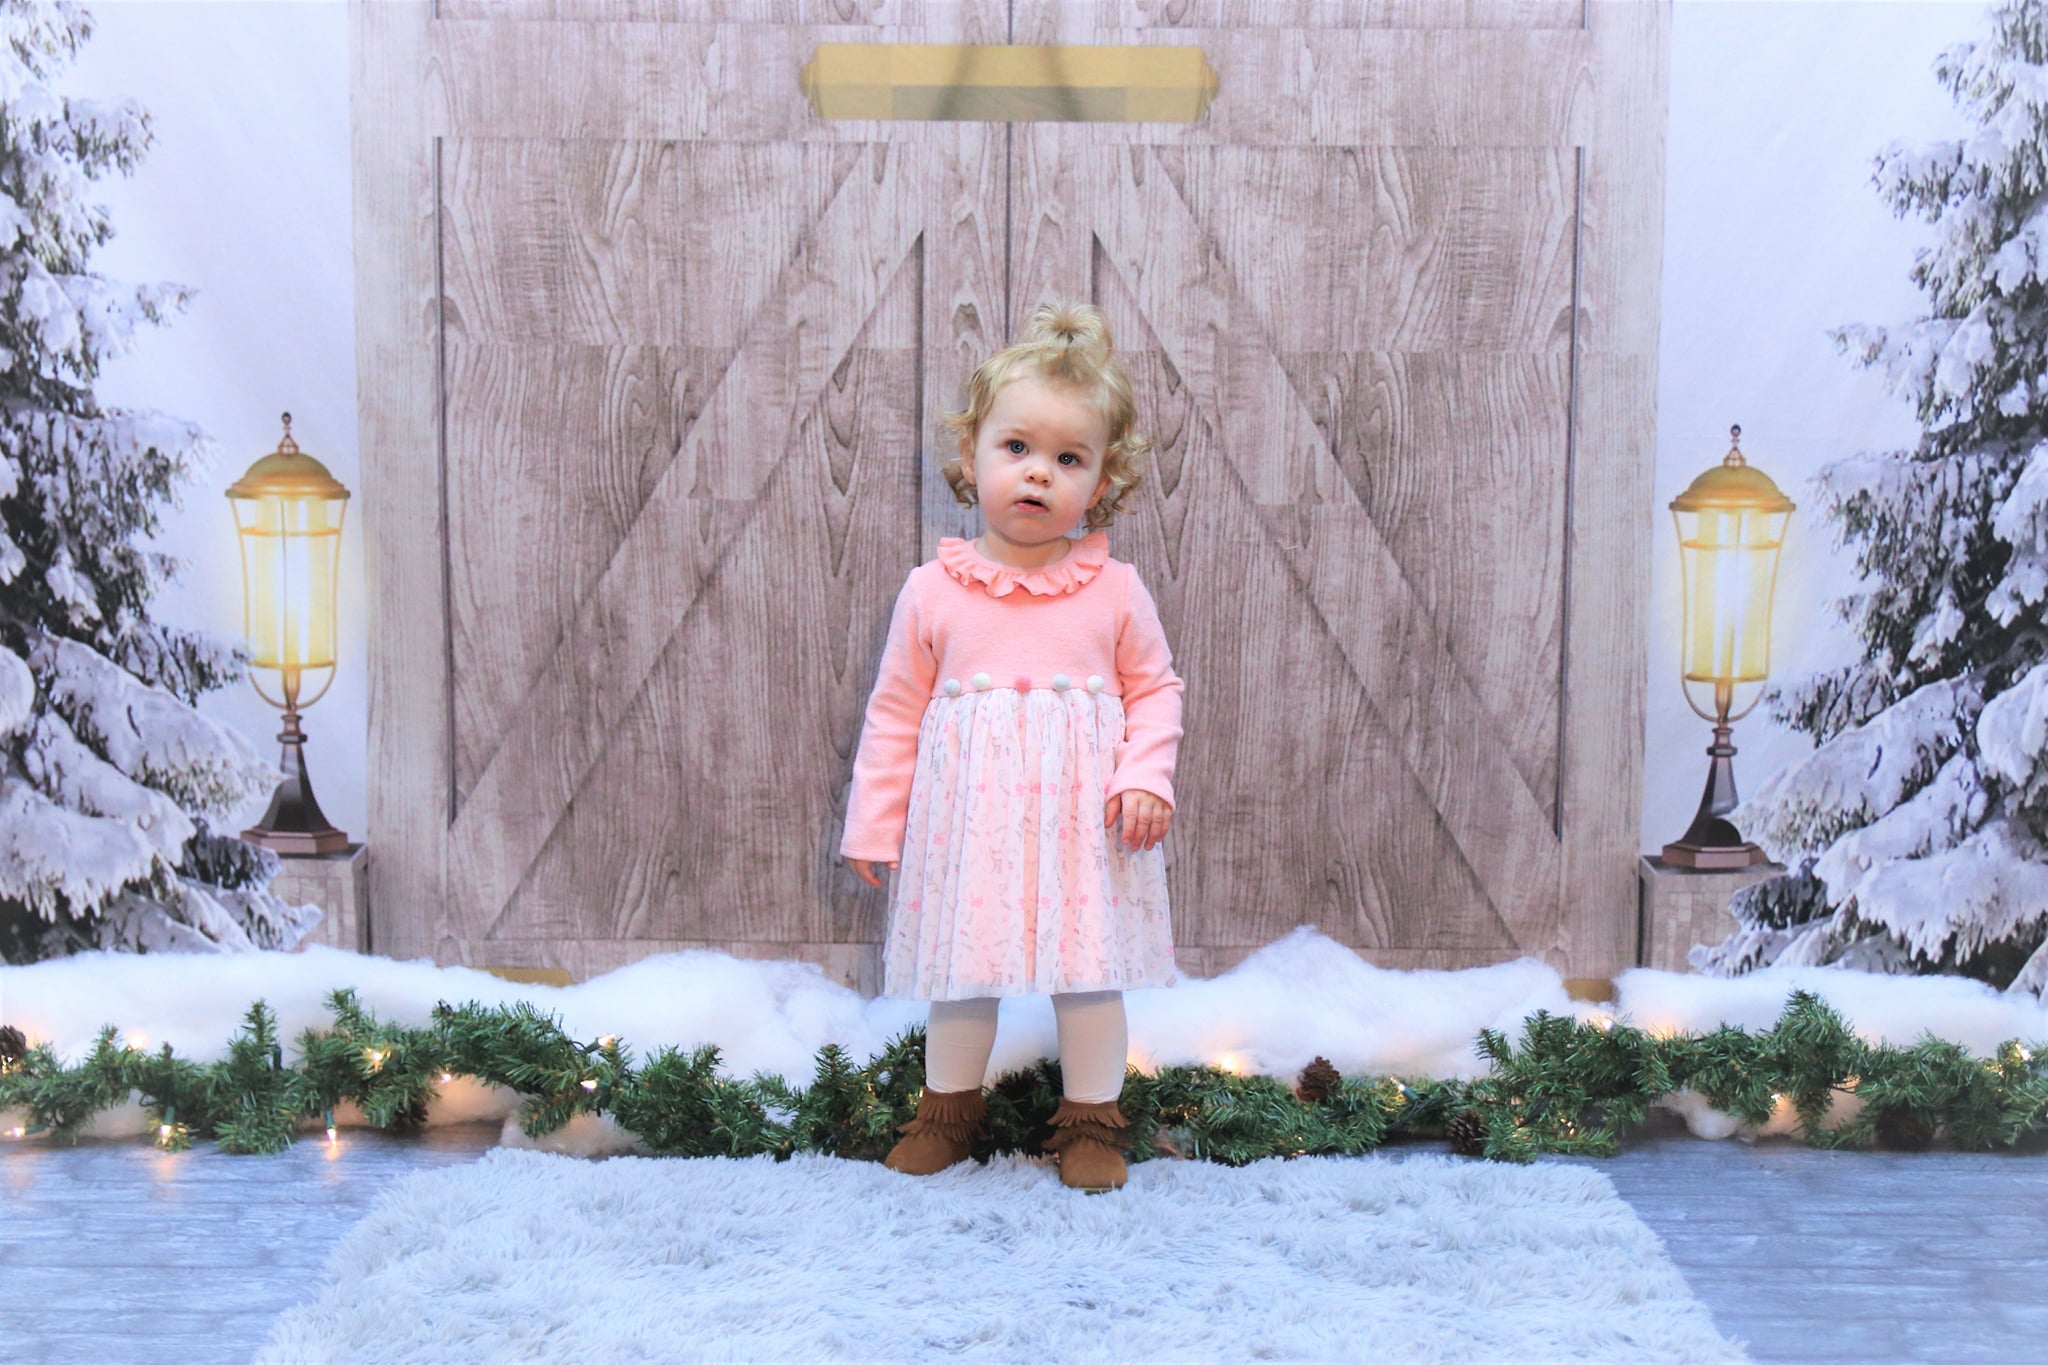 Kate Xmas/Winter Backdrop Snow Trees Lights with Door for Photography